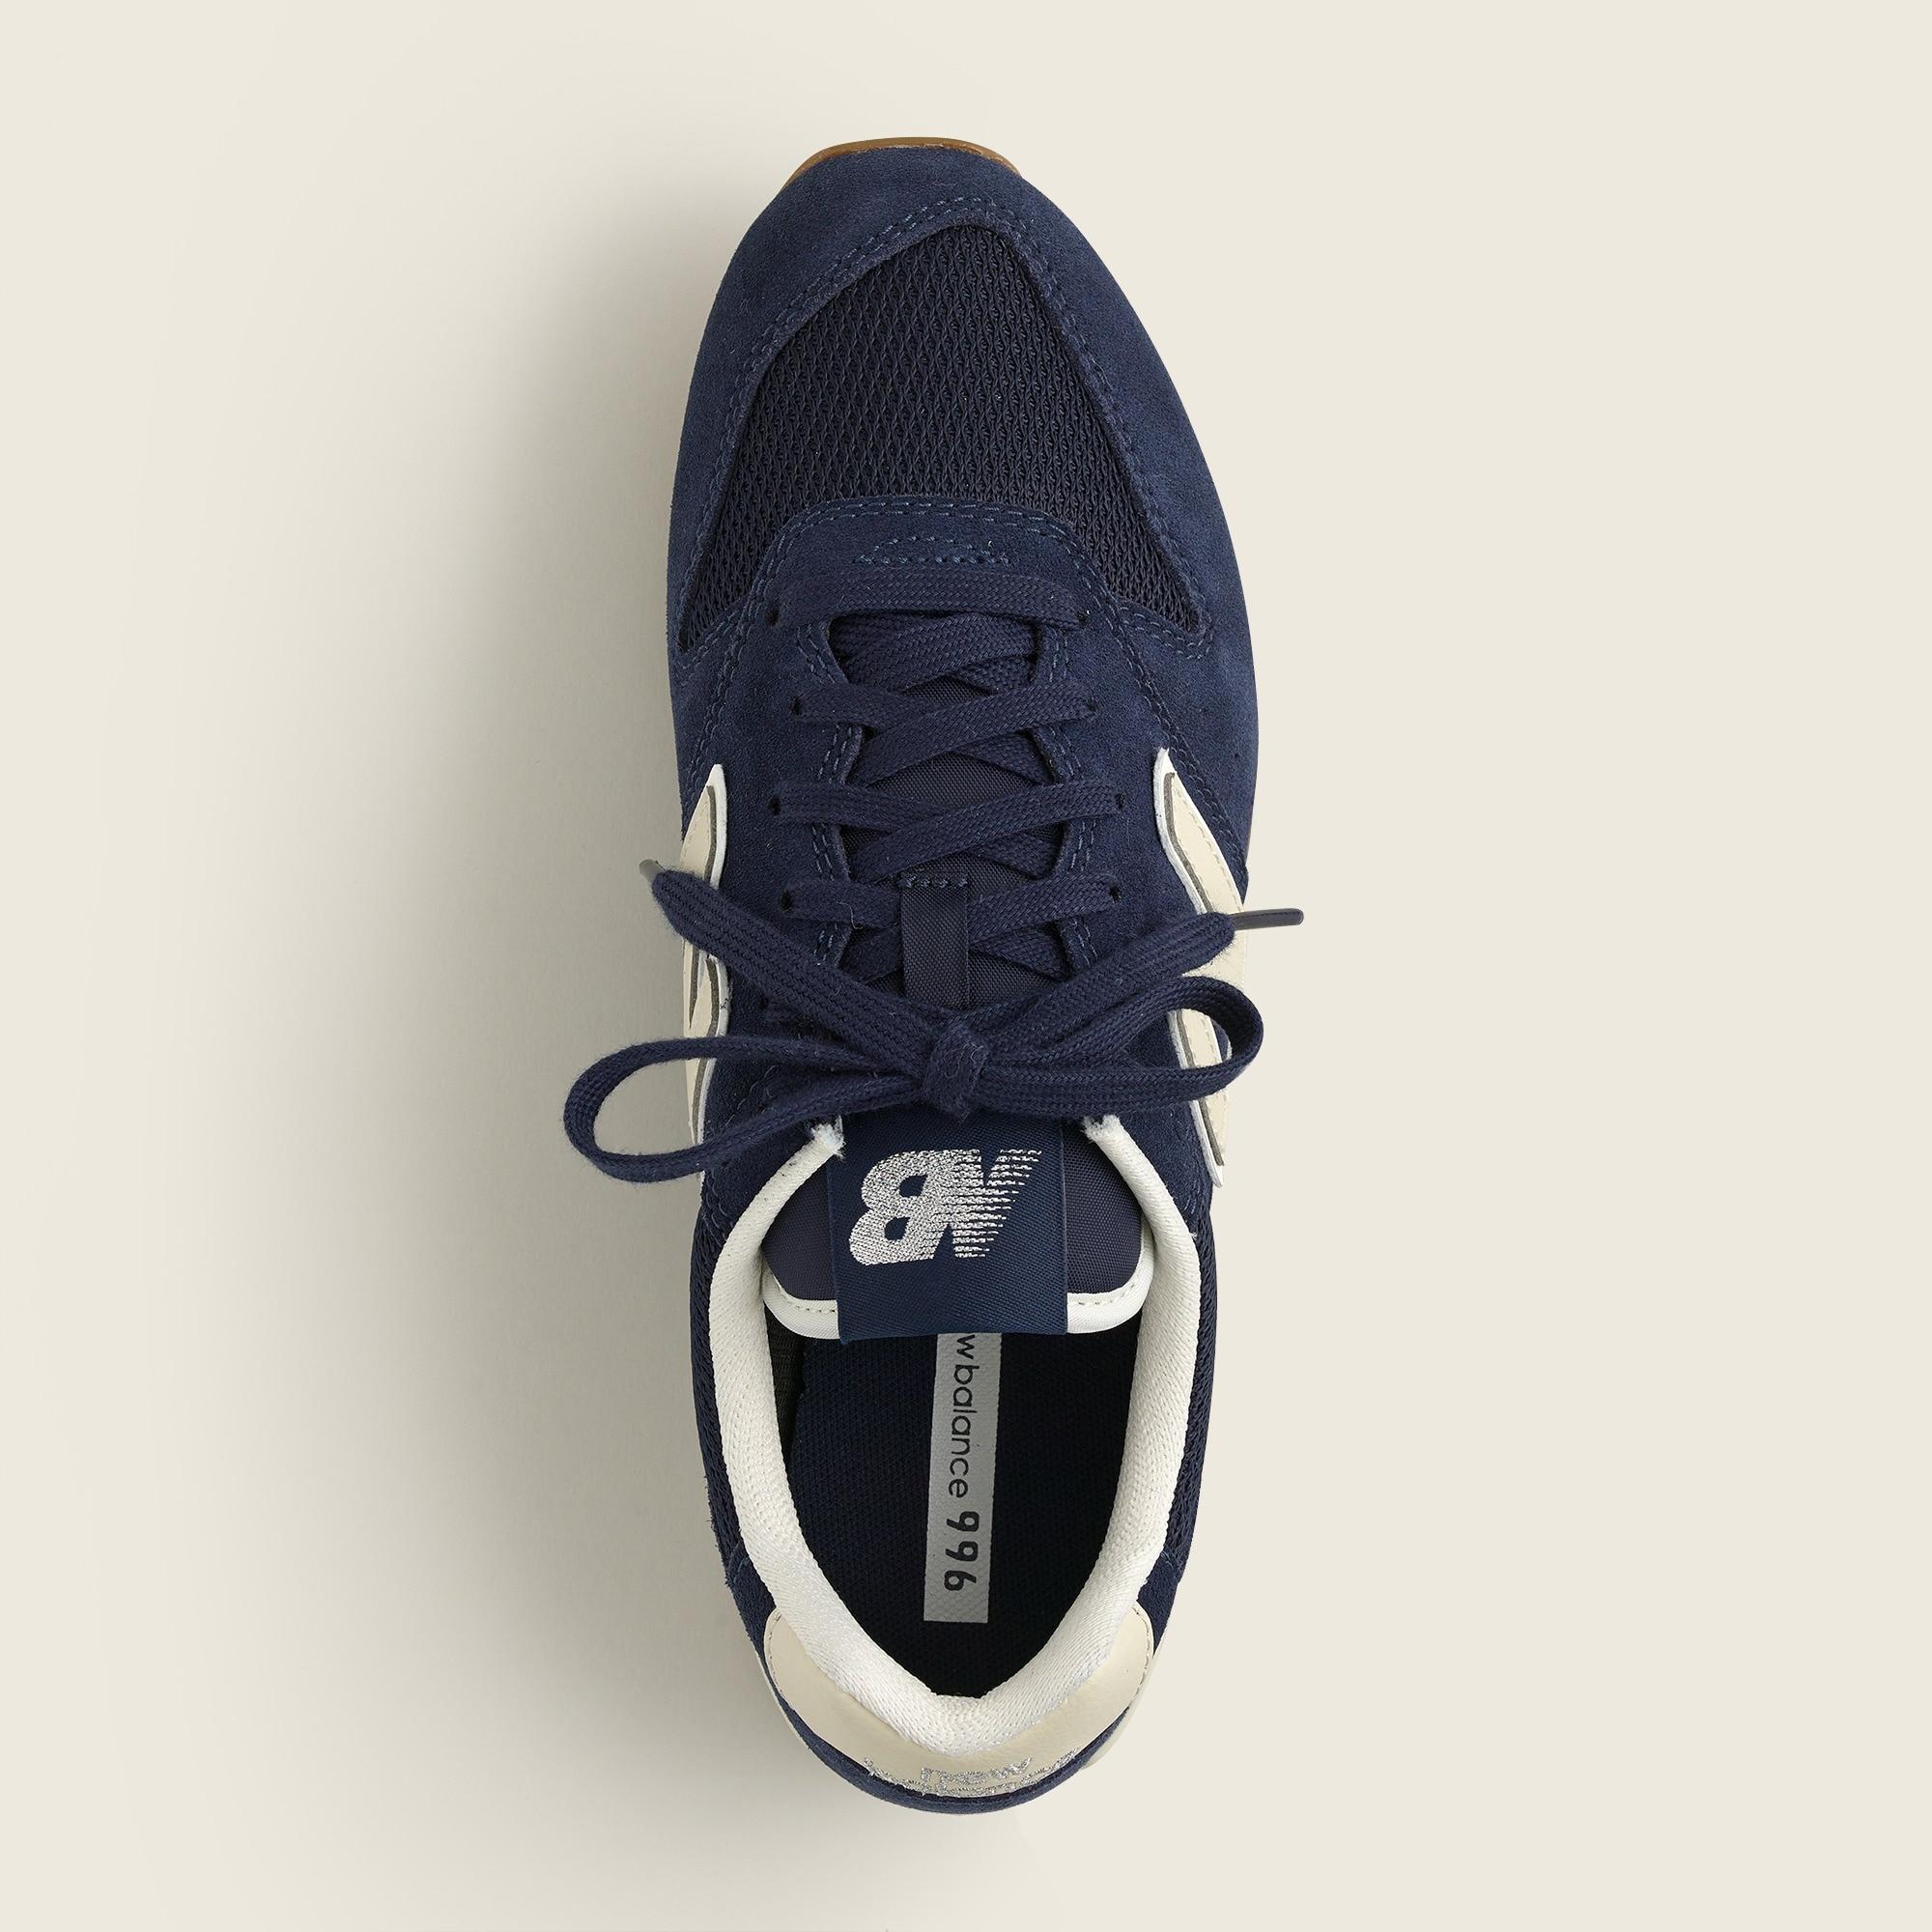 New Balance ® X J.crew 996 Sneakers In Suede in Navy/Sand (Blue) - Lyst